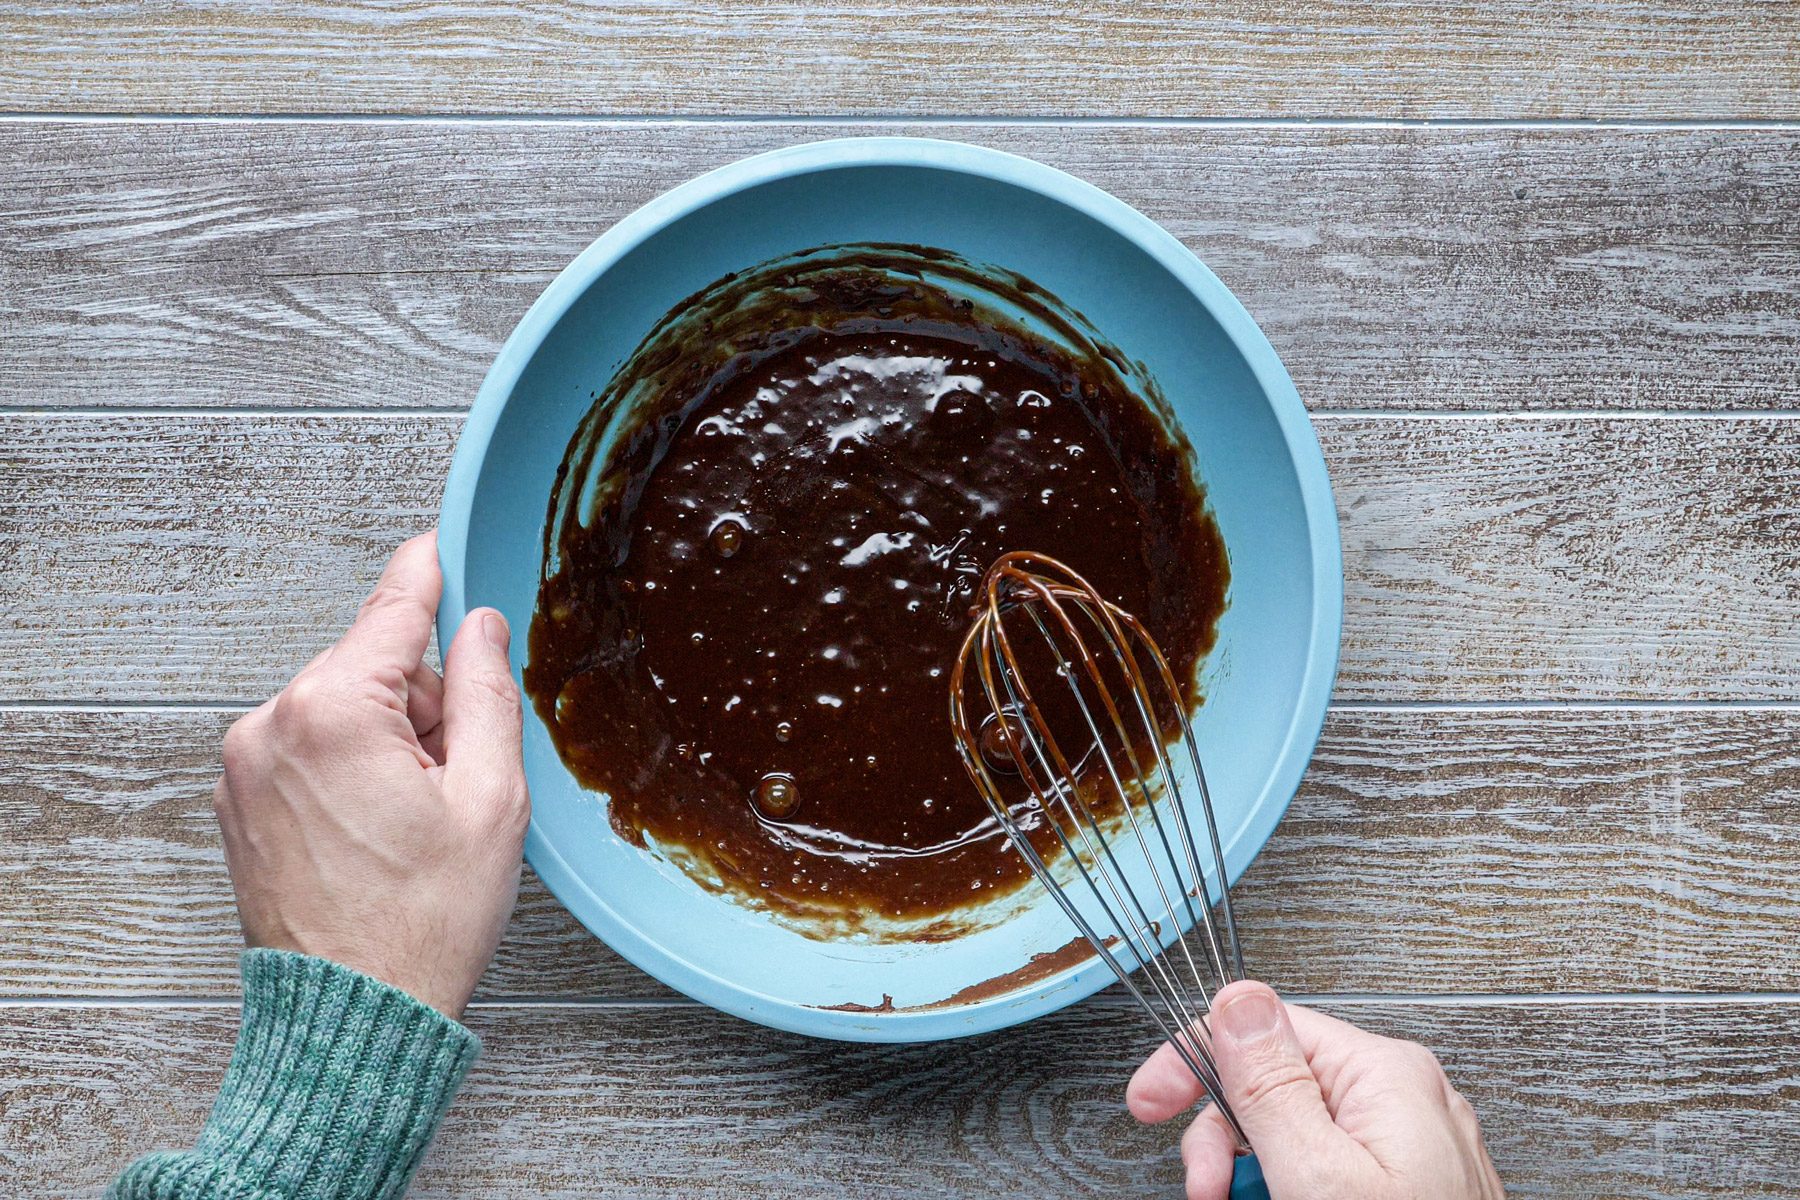 A person whisking a chocolate liquid in a blue bowl